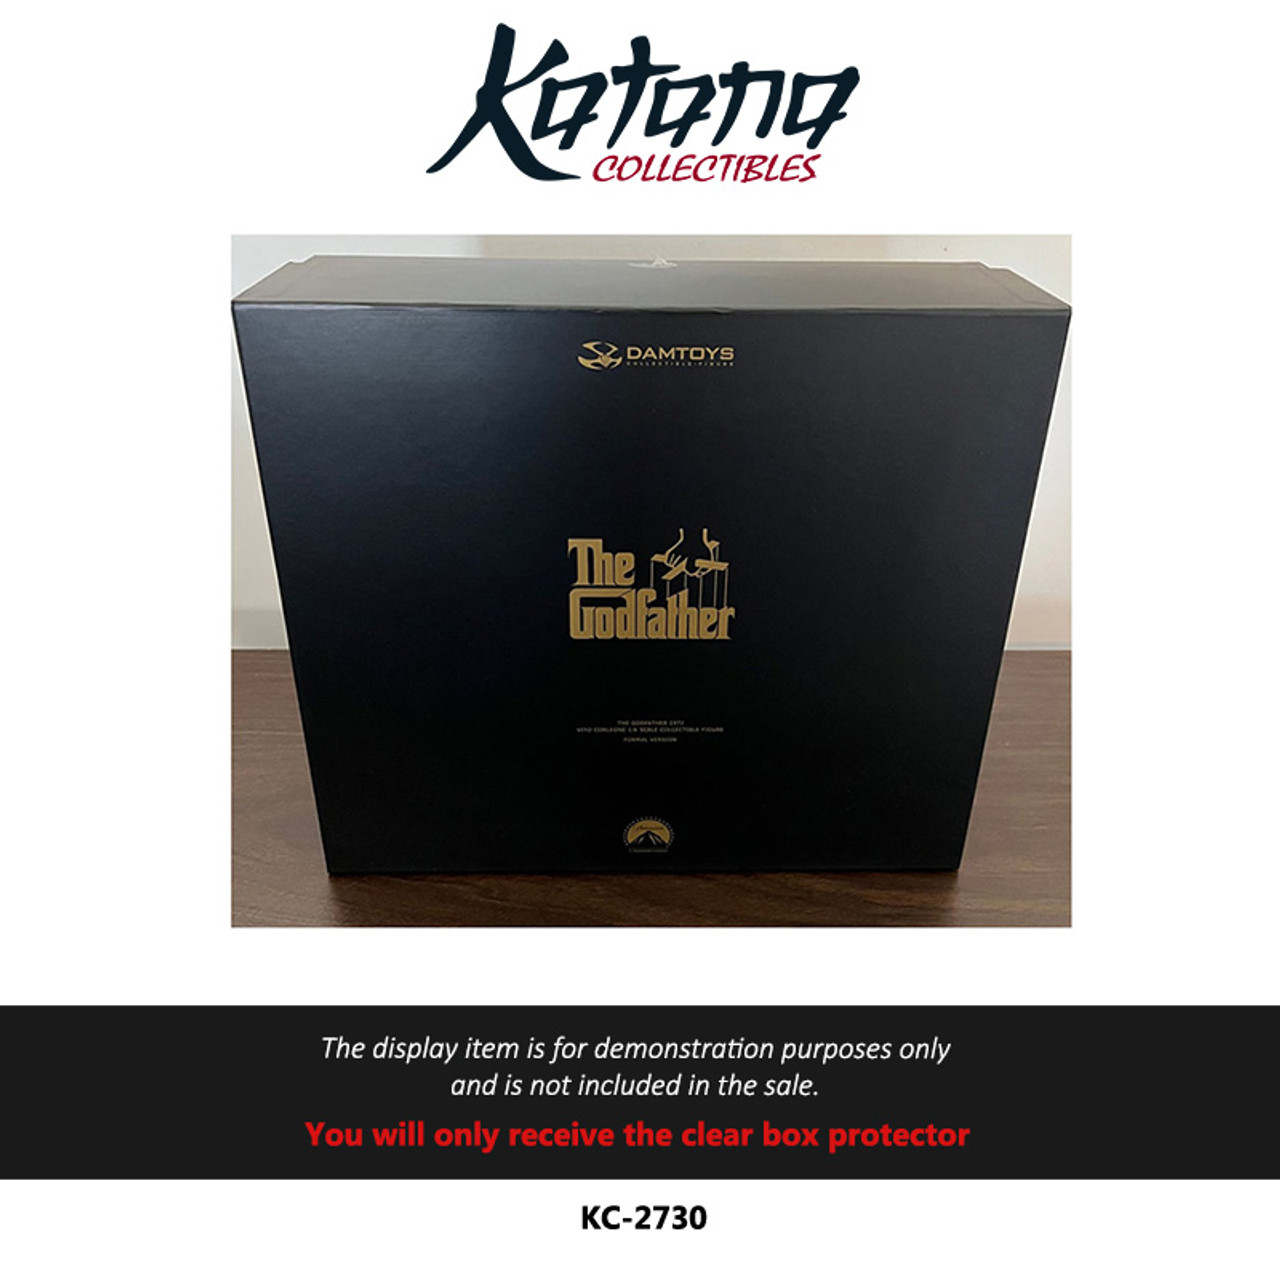 Katana Collectibles Protector For Damtoys The Godfather Vito Corleone Sixth Scale Collectible Figure